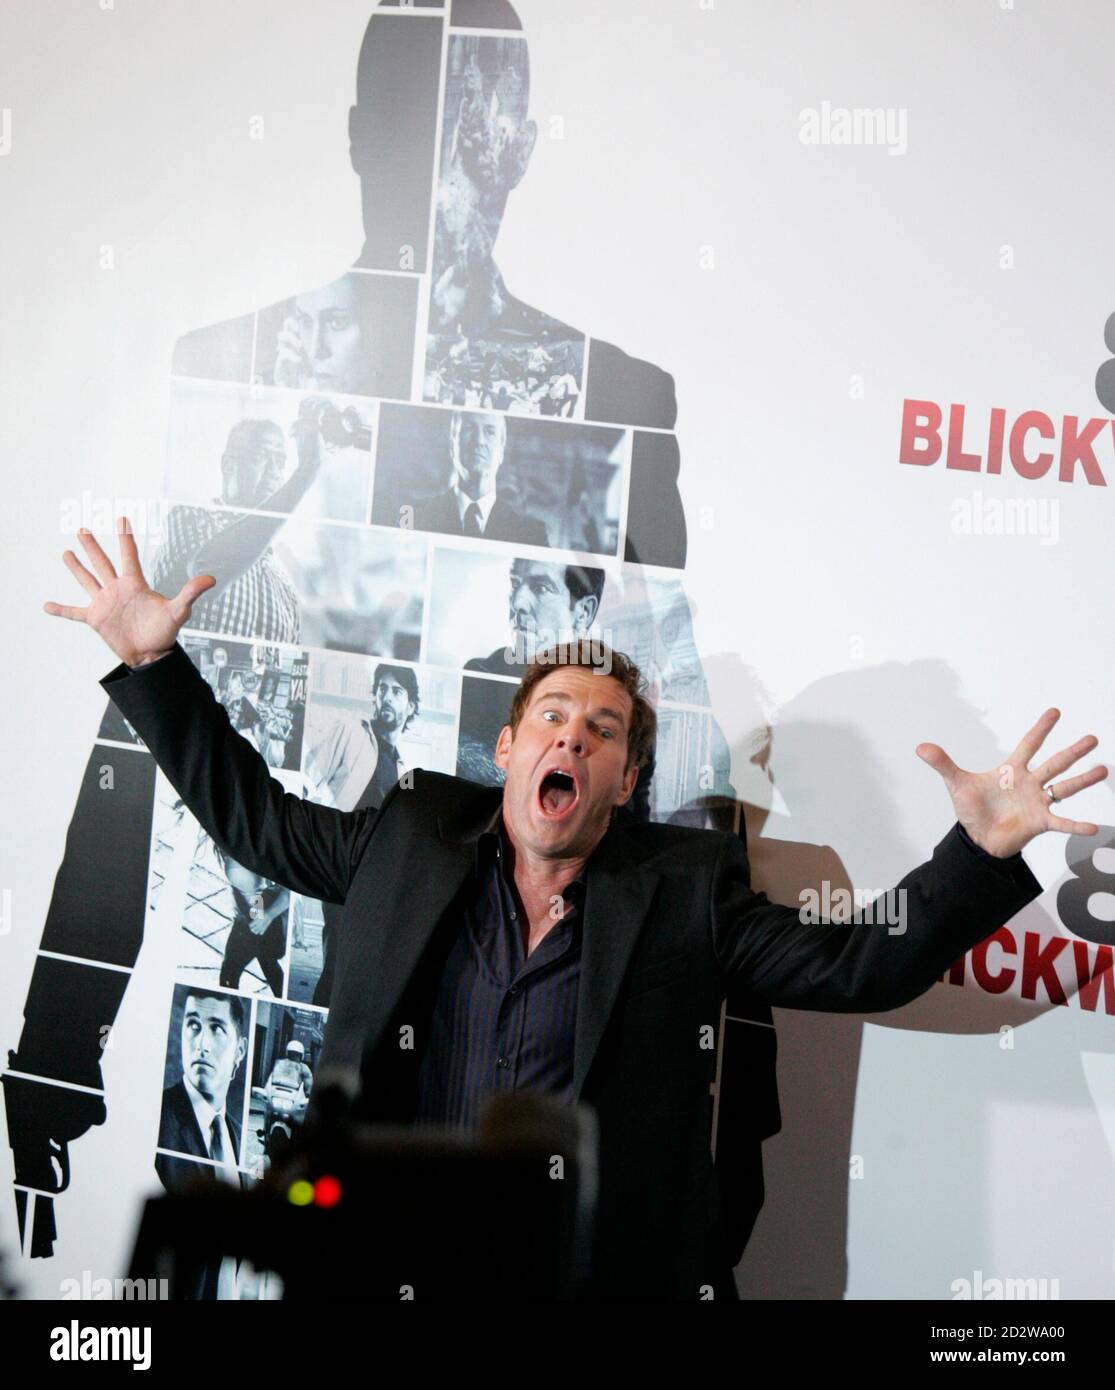 Actor Dennis Quaid poses during a photocall to present his latest movie '8 Blickwinkel' (Vantage Point) in Berlin, February 16, 2008. The movie directed by Pete Travis opens in Germany on February 28.     REUTERS/Tobias Schwarz     (GERMANY) Stock Photo